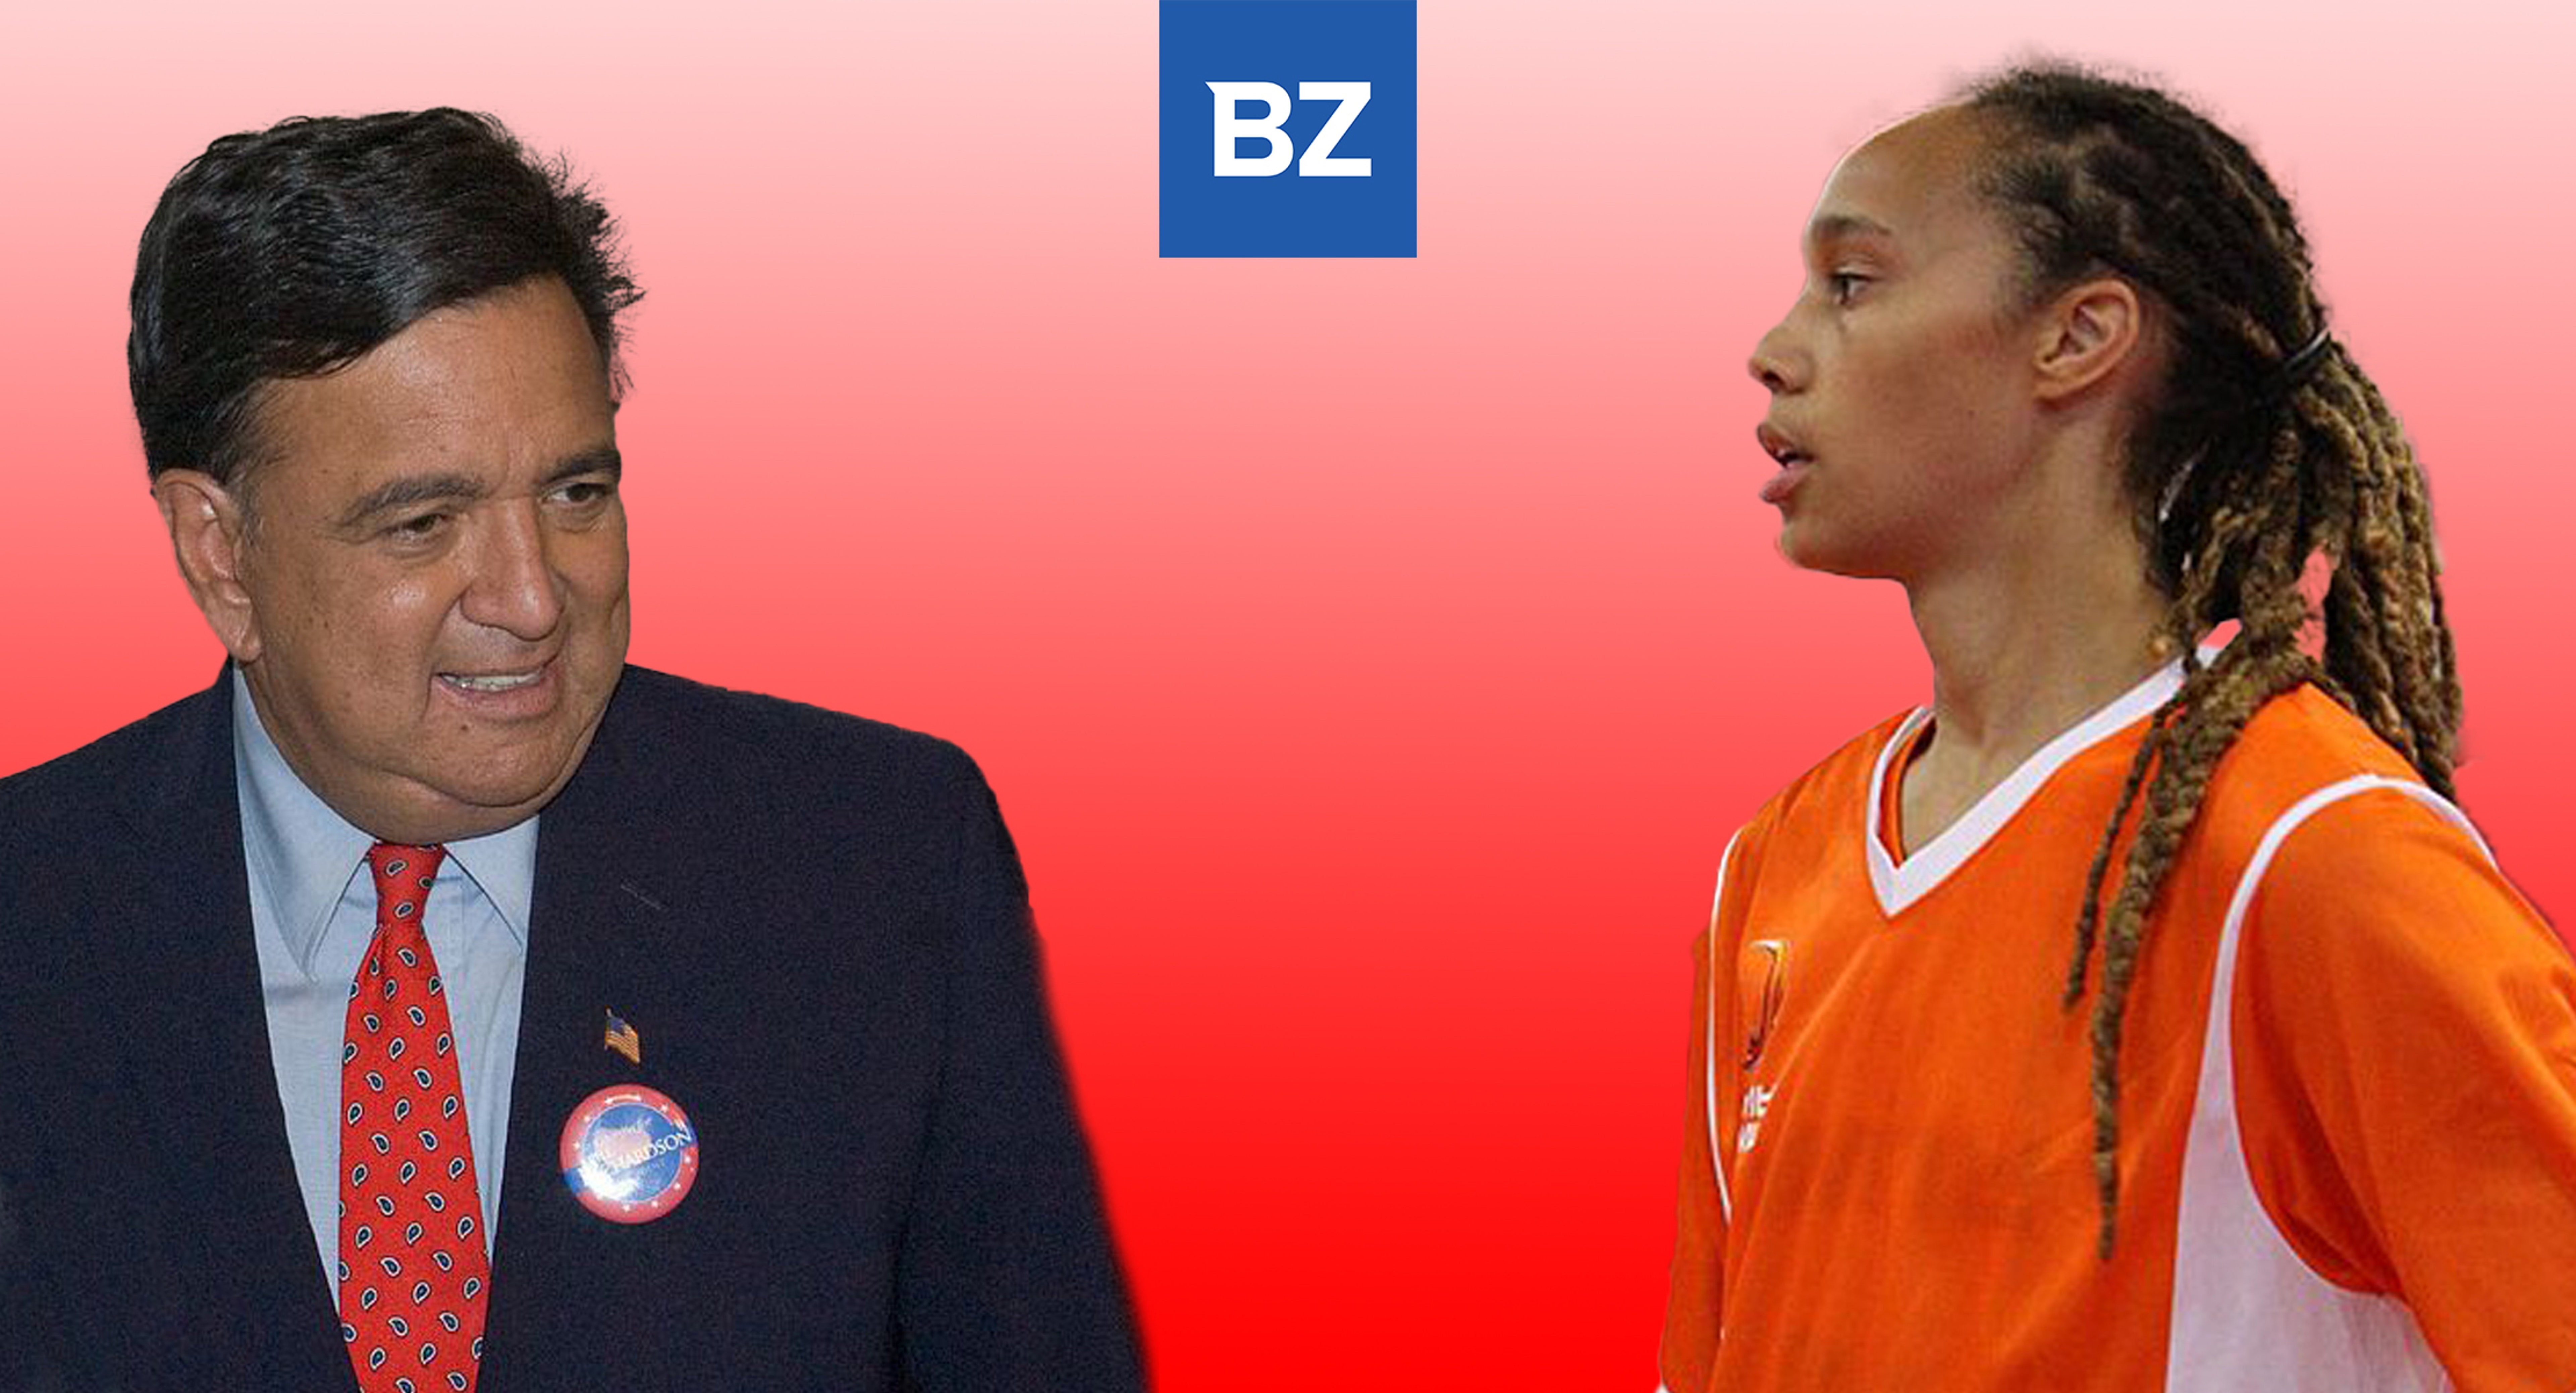 Former Gov. Bill Richardson To ABC: Brittney Griner &amp; Paul Whelan Could Be Part Of Two-For-Two Russian Prisoner Swap